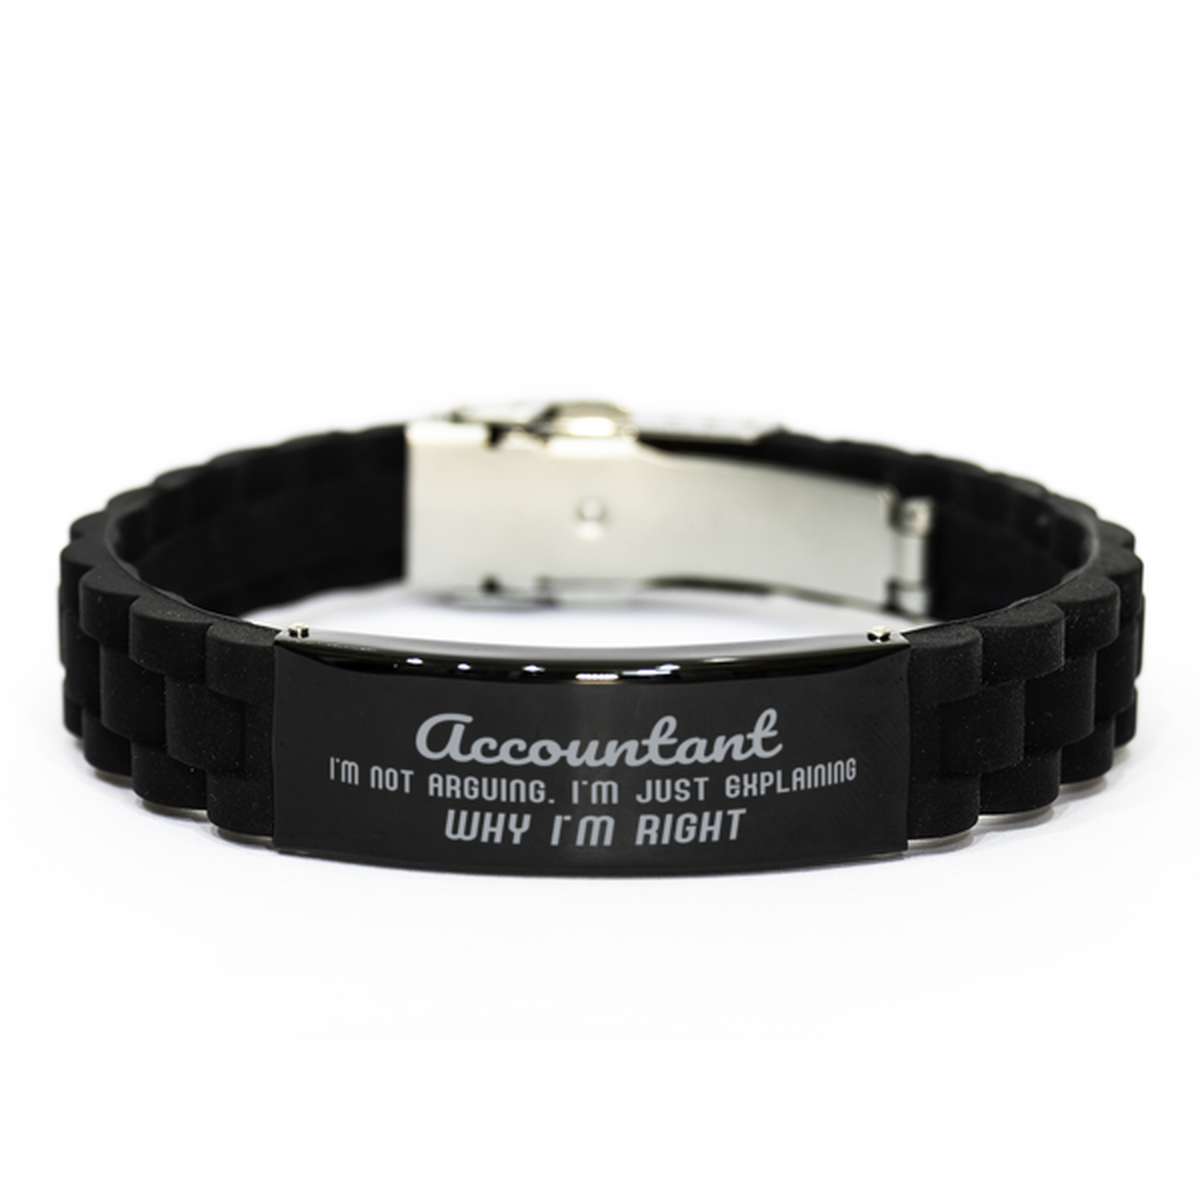 Accountant I'm not Arguing. I'm Just Explaining Why I'm RIGHT Black Glidelock Clasp Bracelet, Funny Saying Quote Accountant Gifts For Accountant Graduation Birthday Christmas Gifts for Men Women Coworker